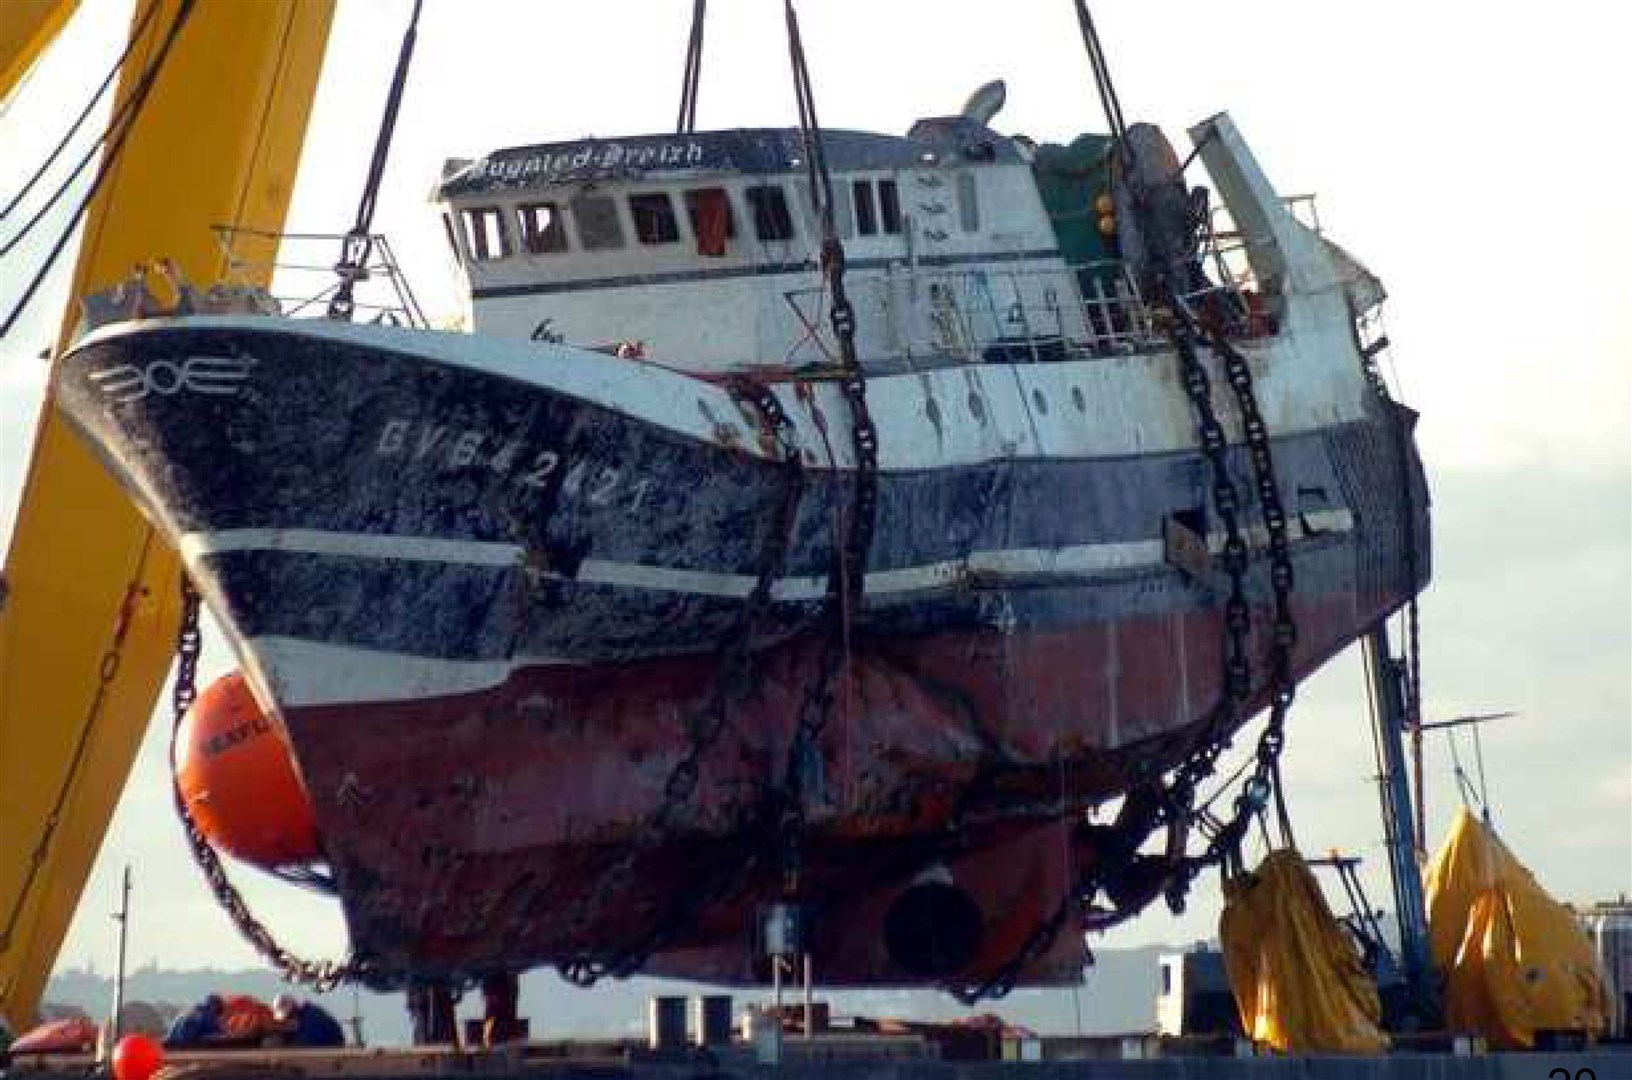 Investigators believe the Bugaled Breizh’s trawling gear became entangled on the seabed (Field Fisher/PA)